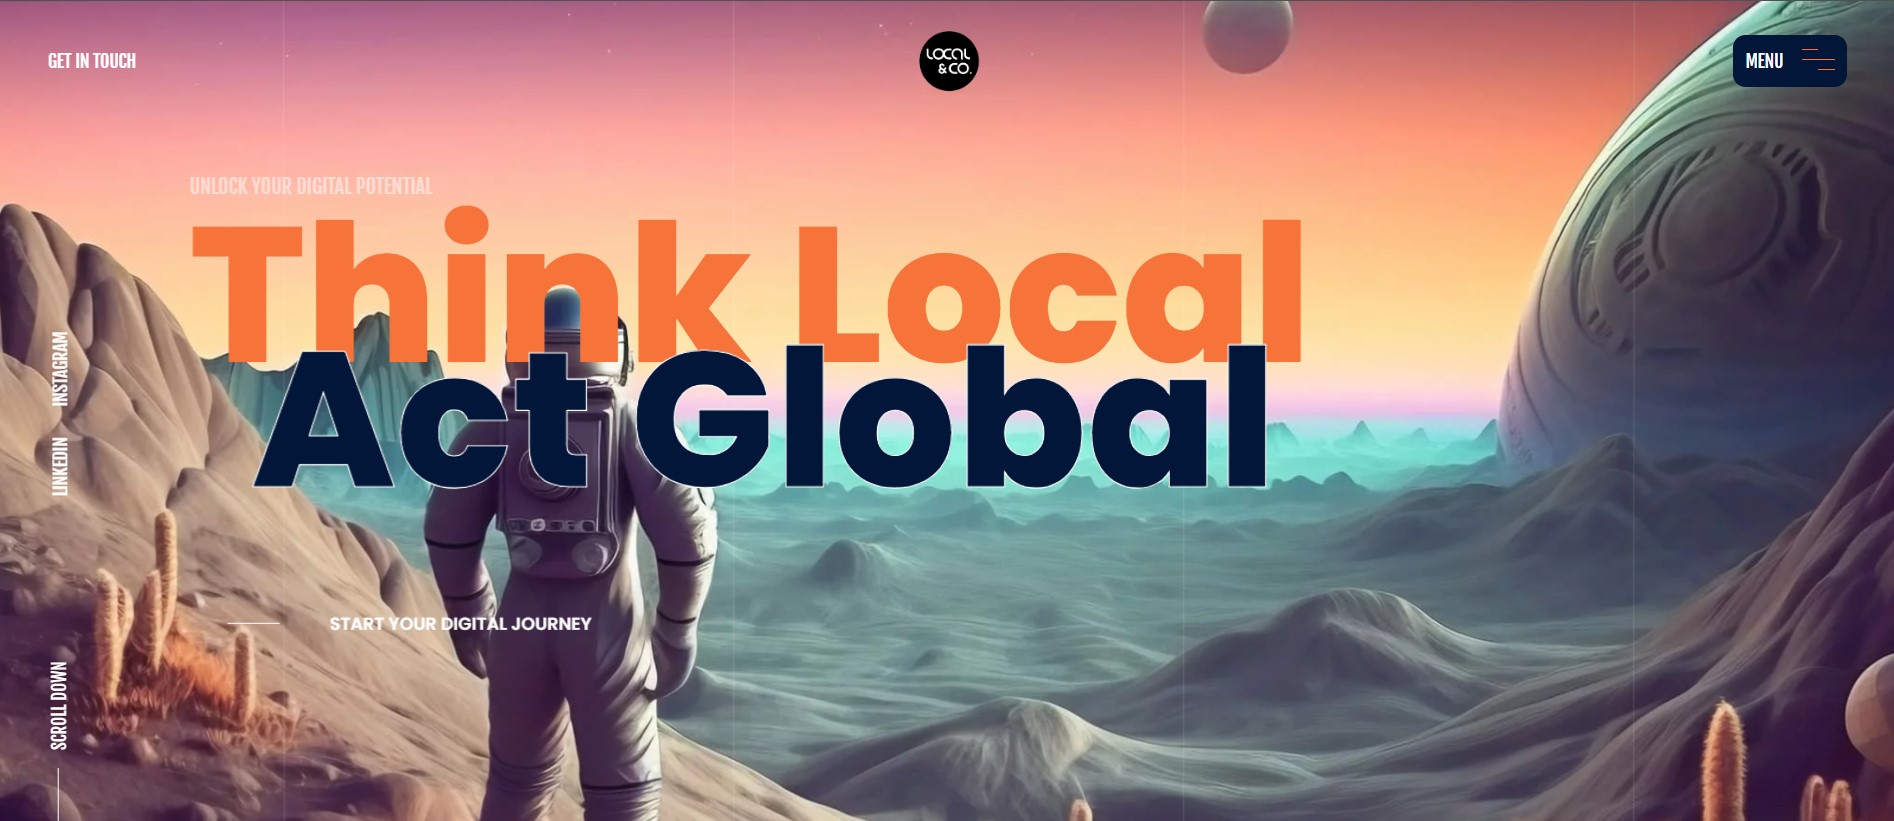 local and co homepage